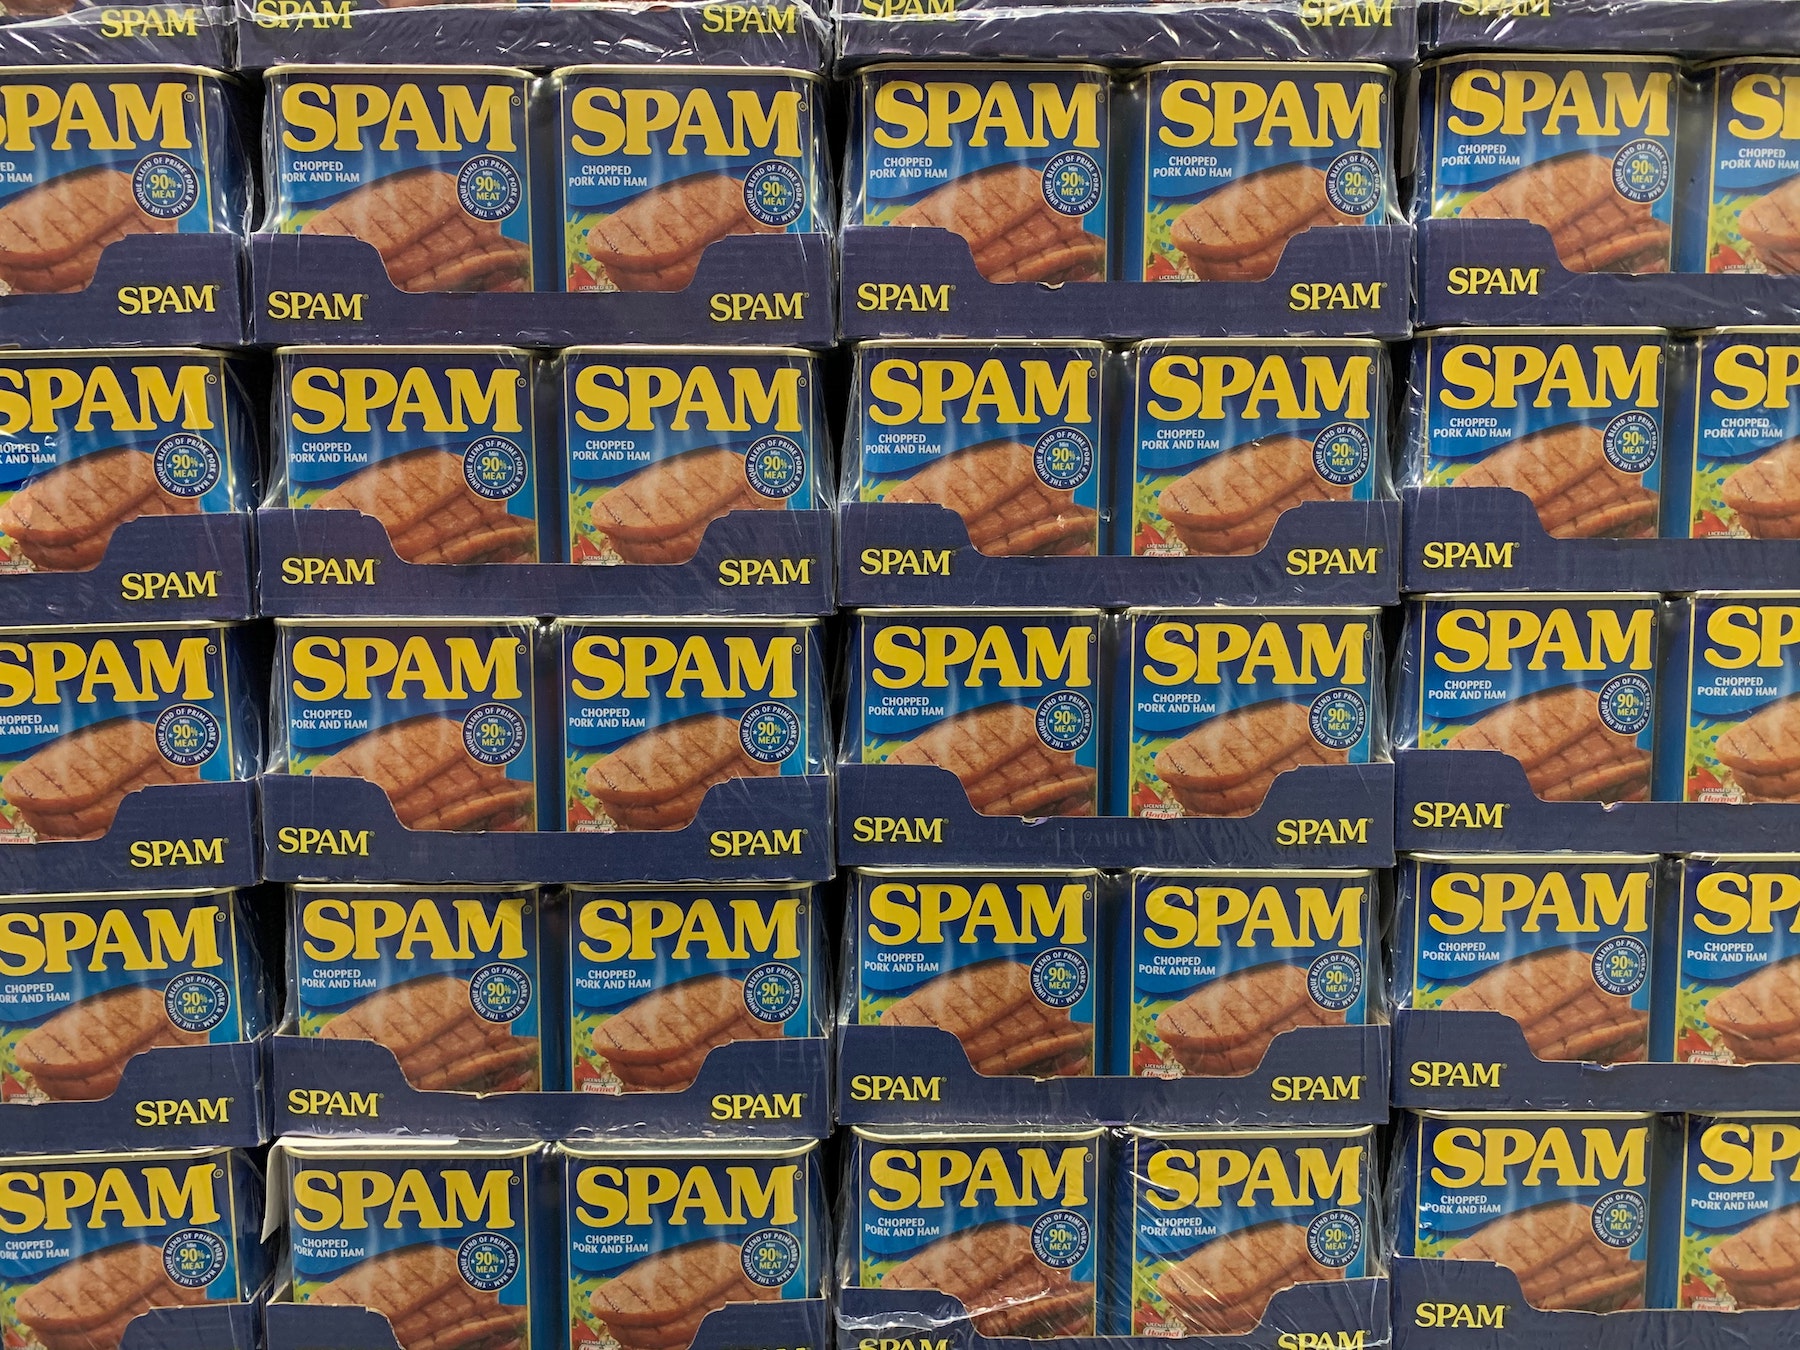 Spam, spam, spam…. and not the good edible kind